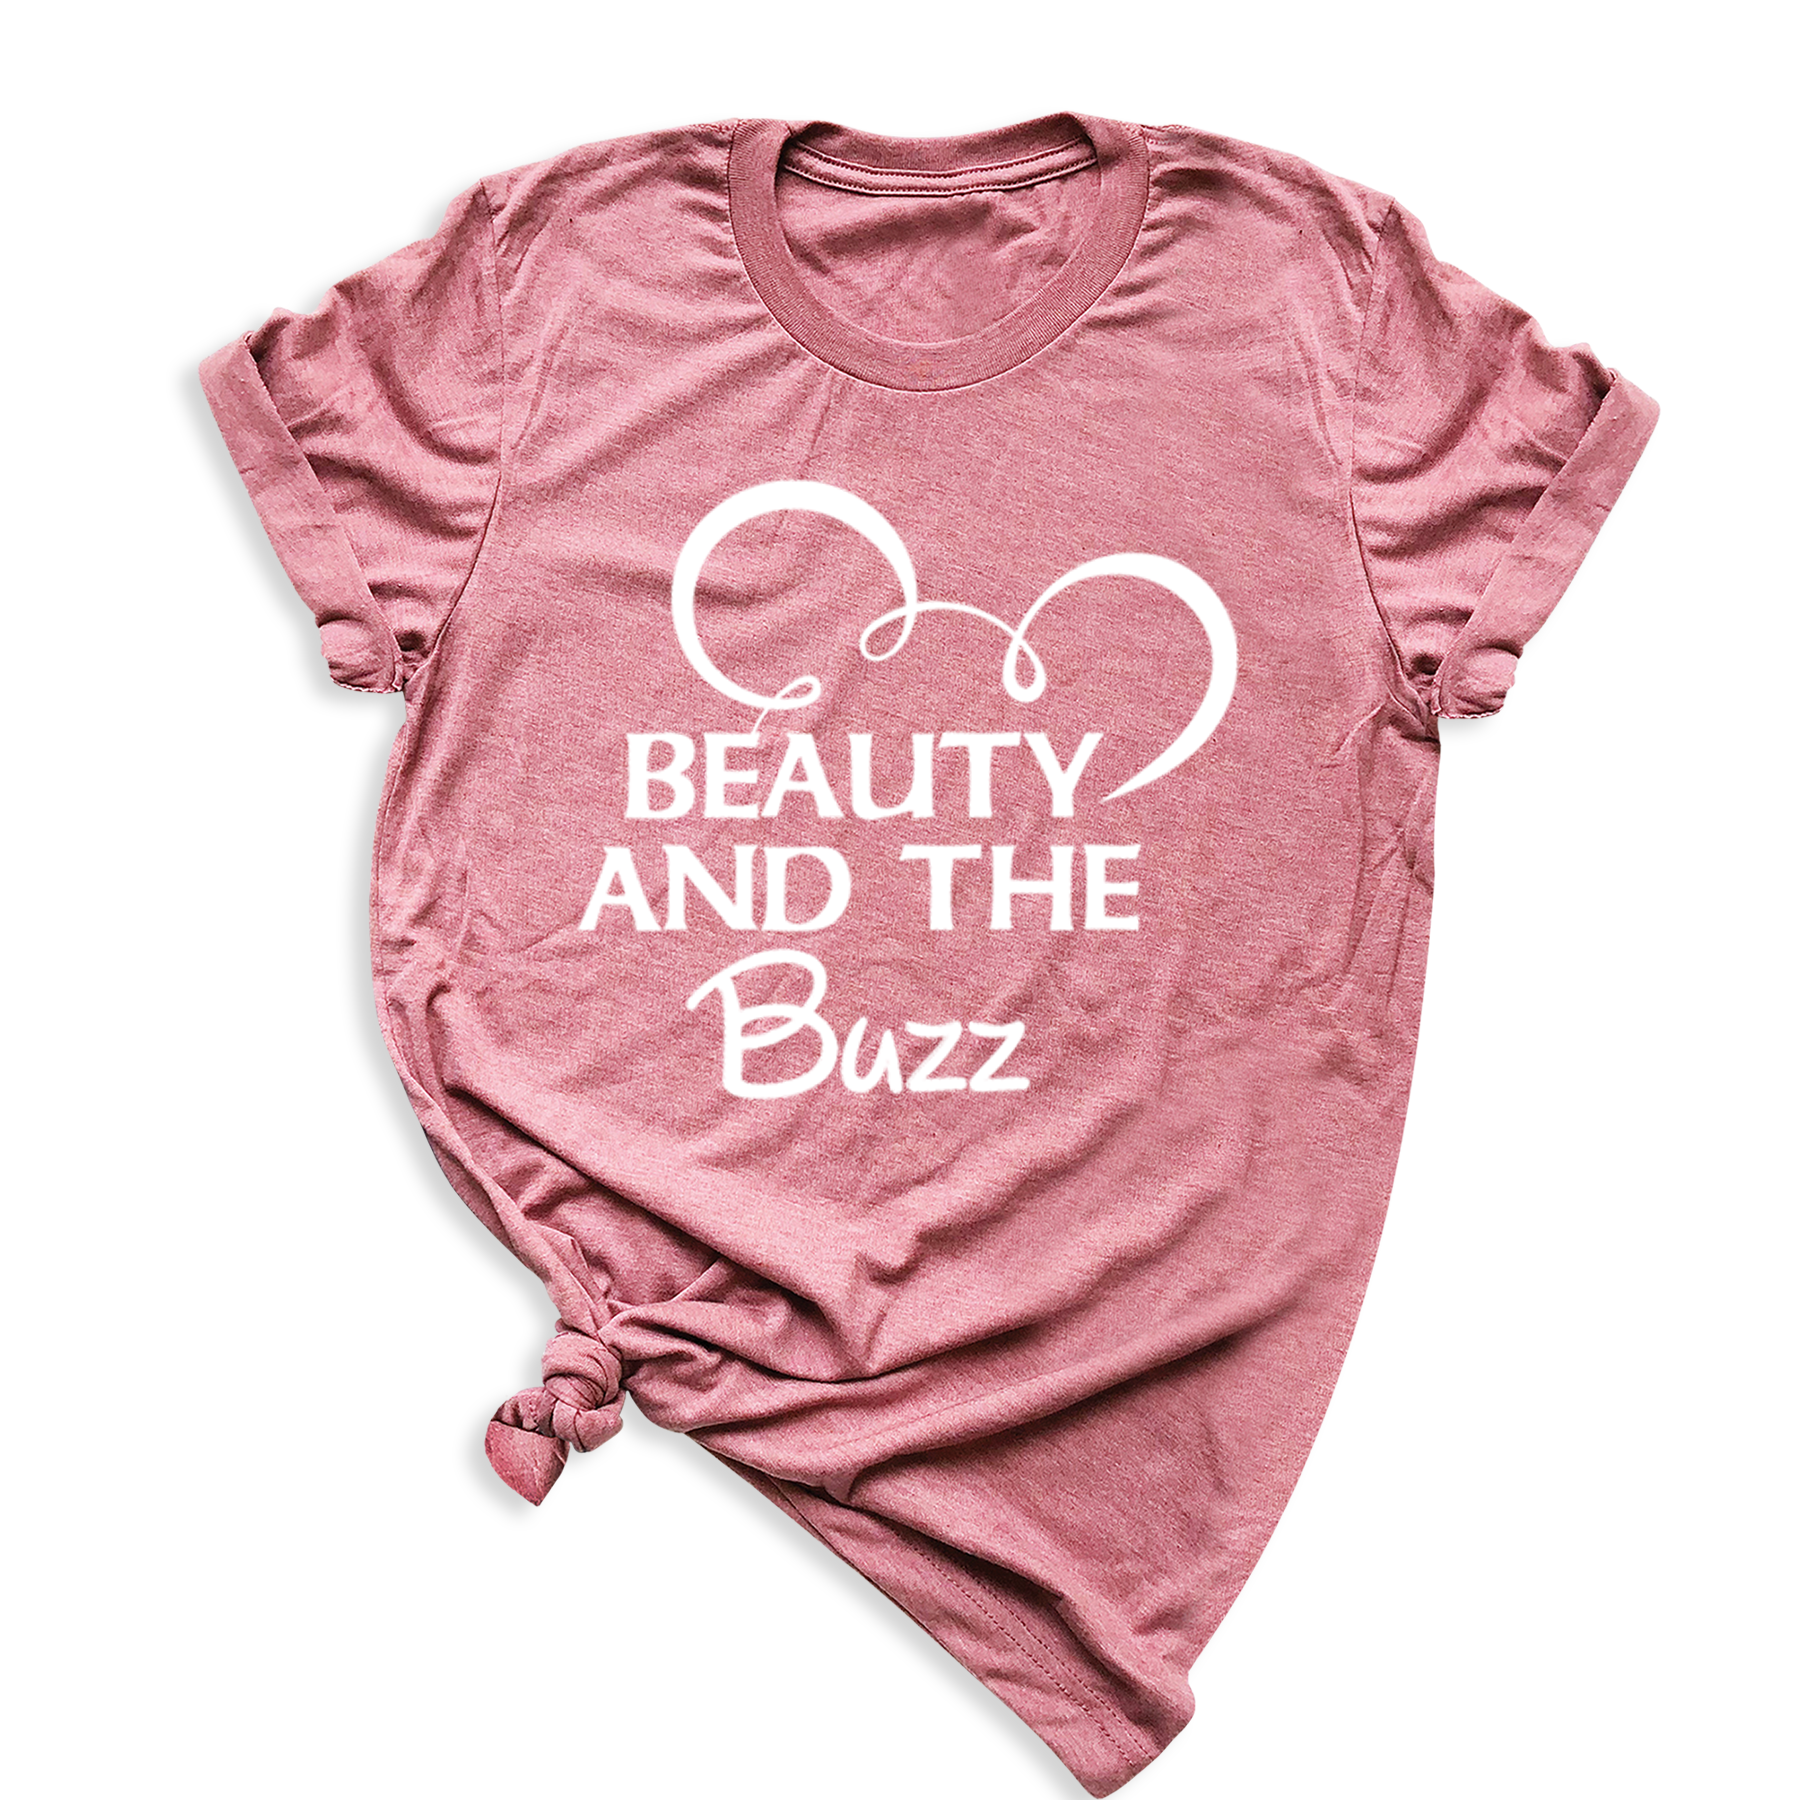 Beauty and The Buzz Disney Shirt